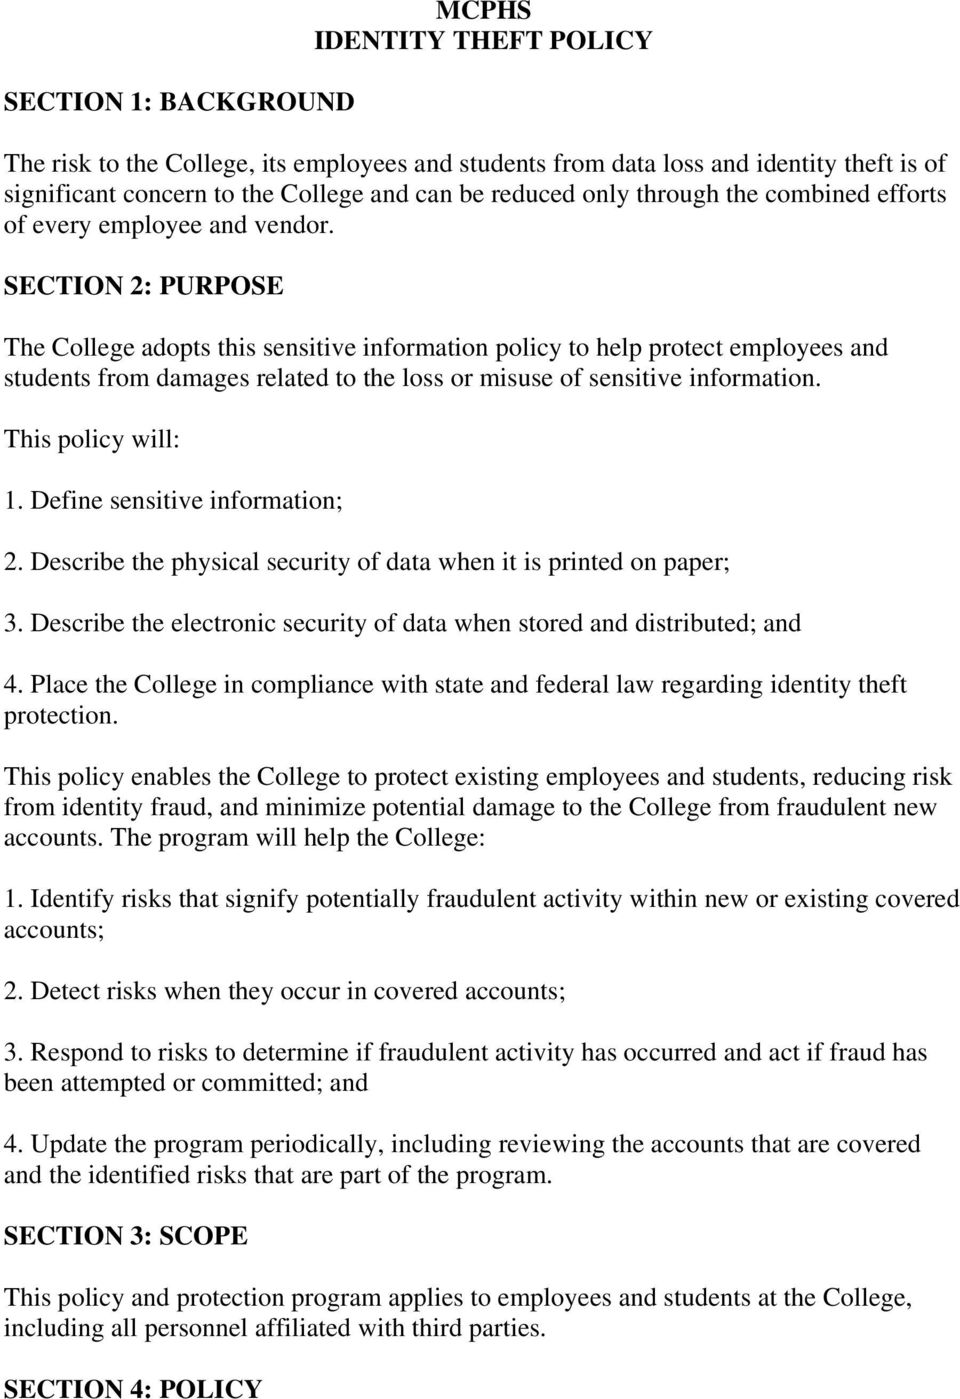 SECTION 2: PURPOSE The College adopts this sensitive information policy to help protect employees and students from damages related to the loss or misuse of sensitive information. This policy will: 1.